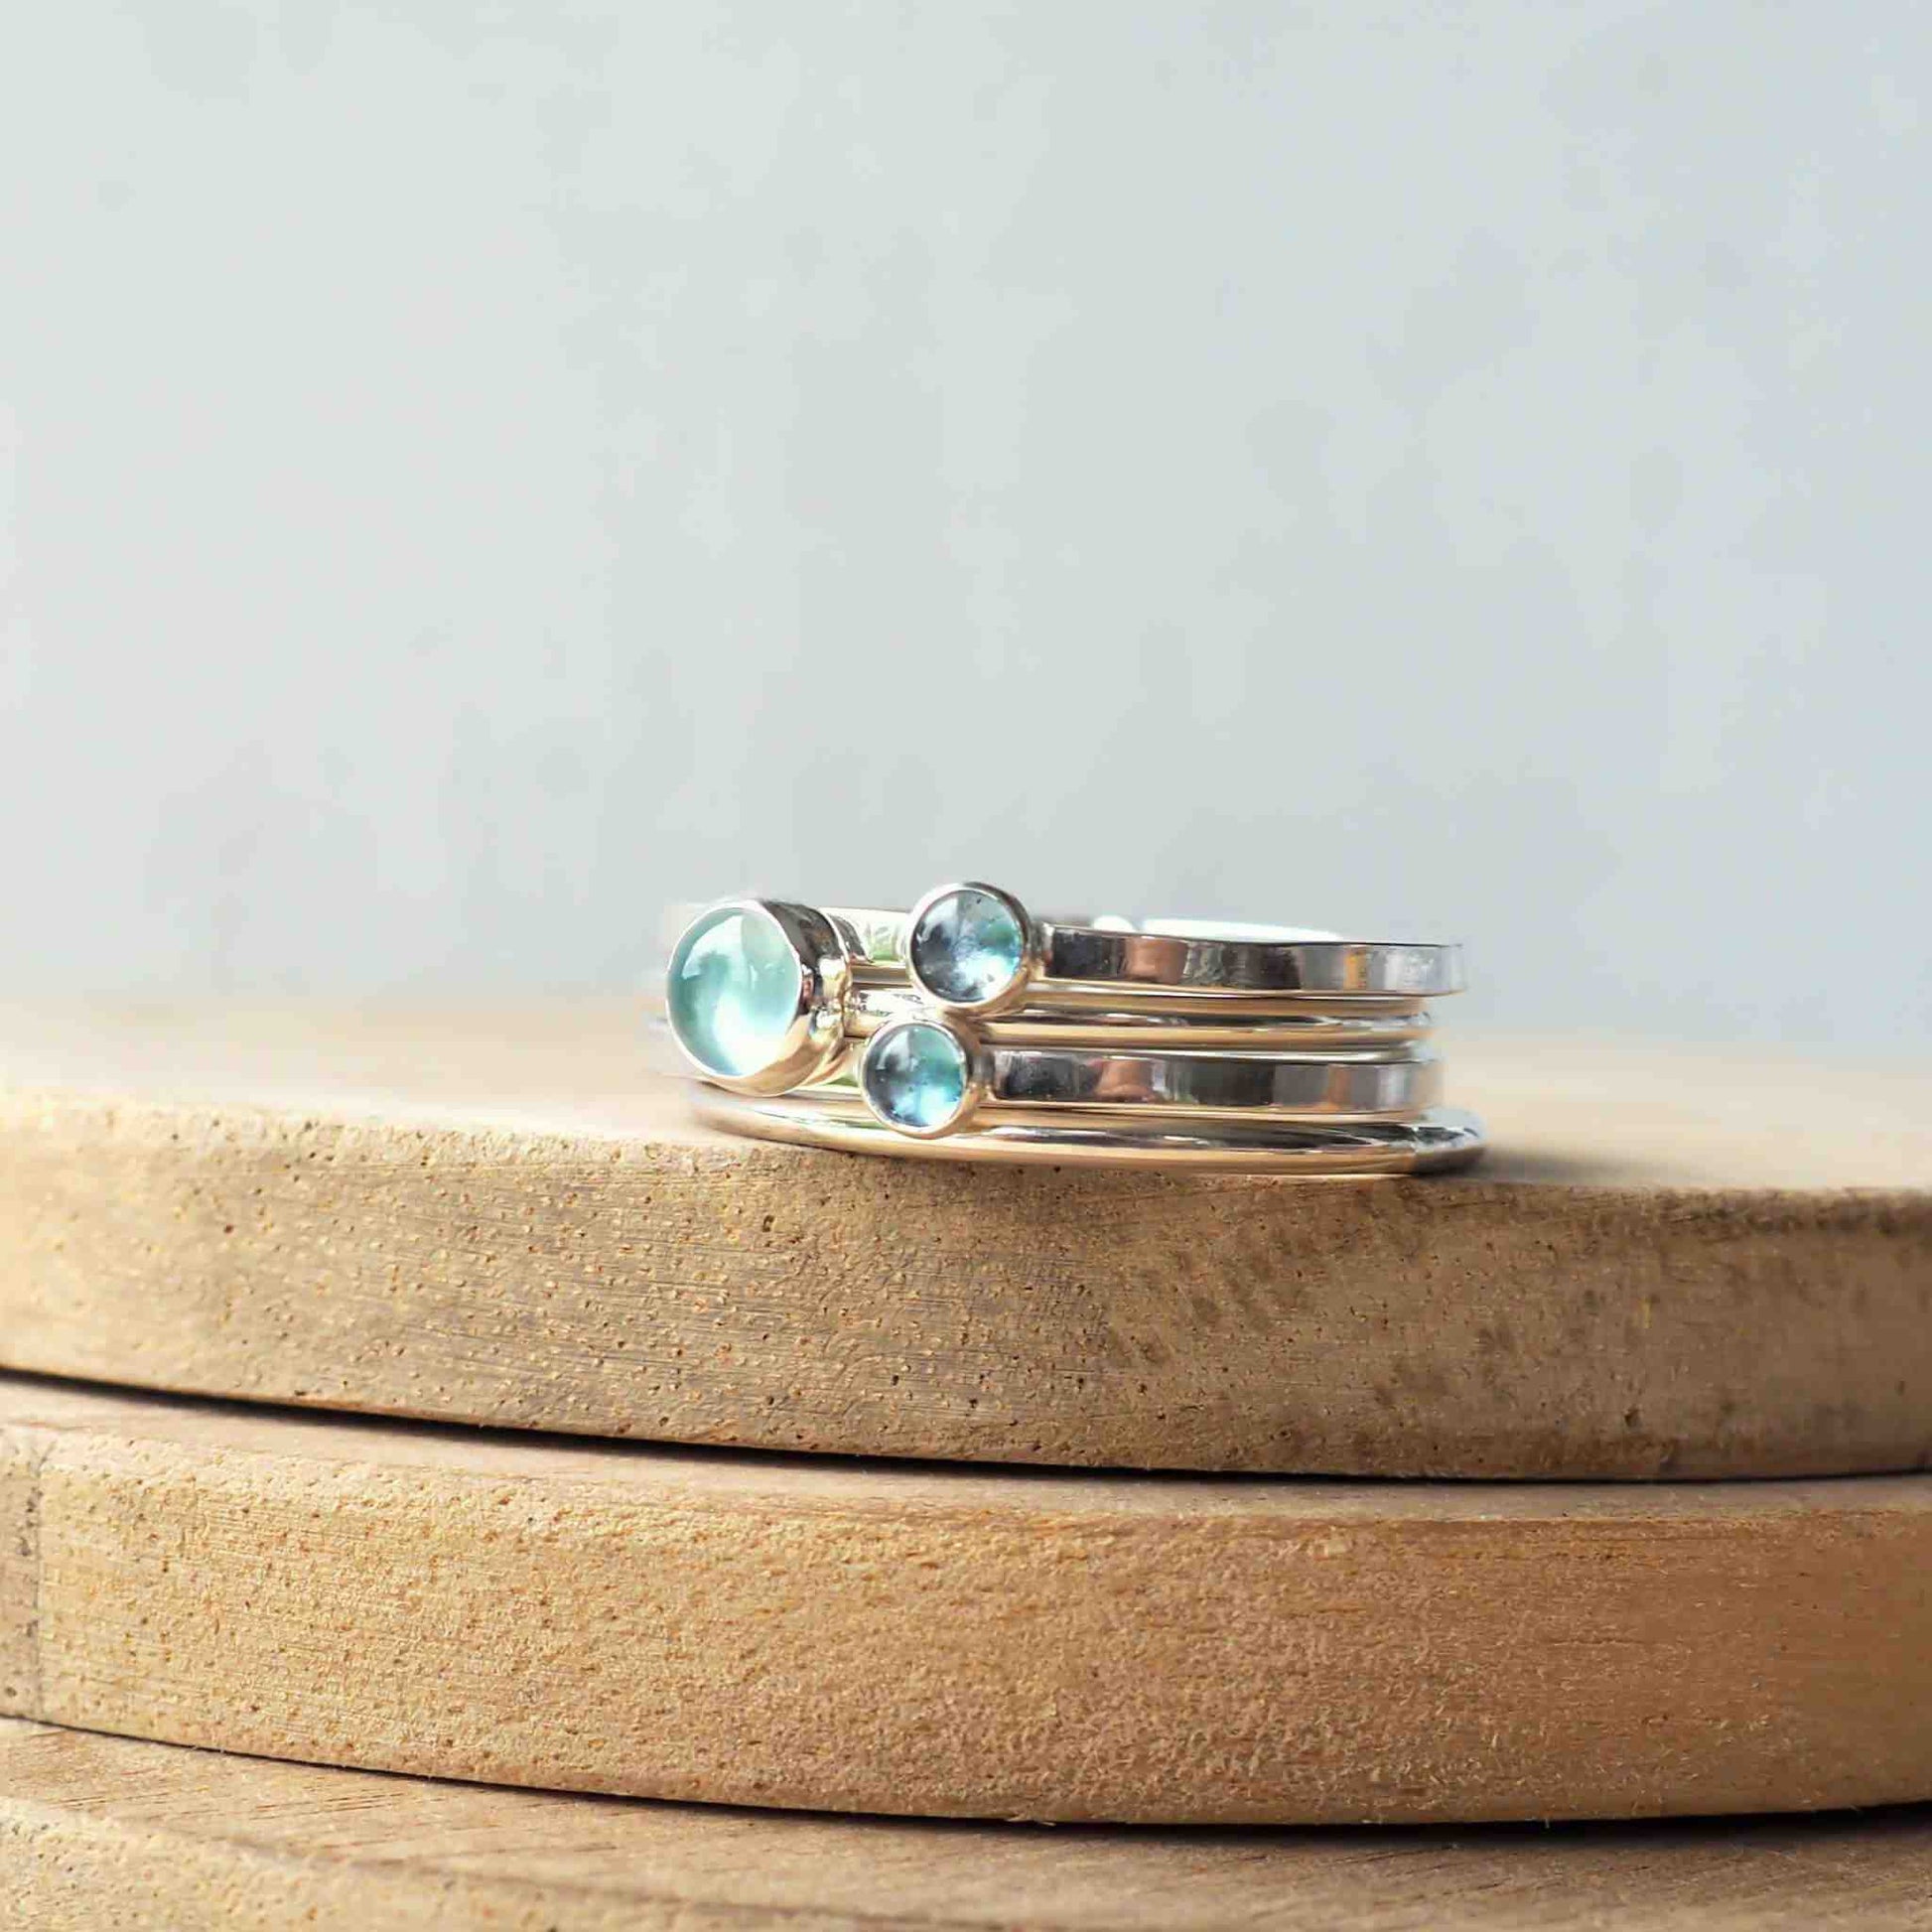 three rings set with different sizes of aquamarine cabochons set onto bands of sterling silver. Handmade in Scotland by maram jewellery